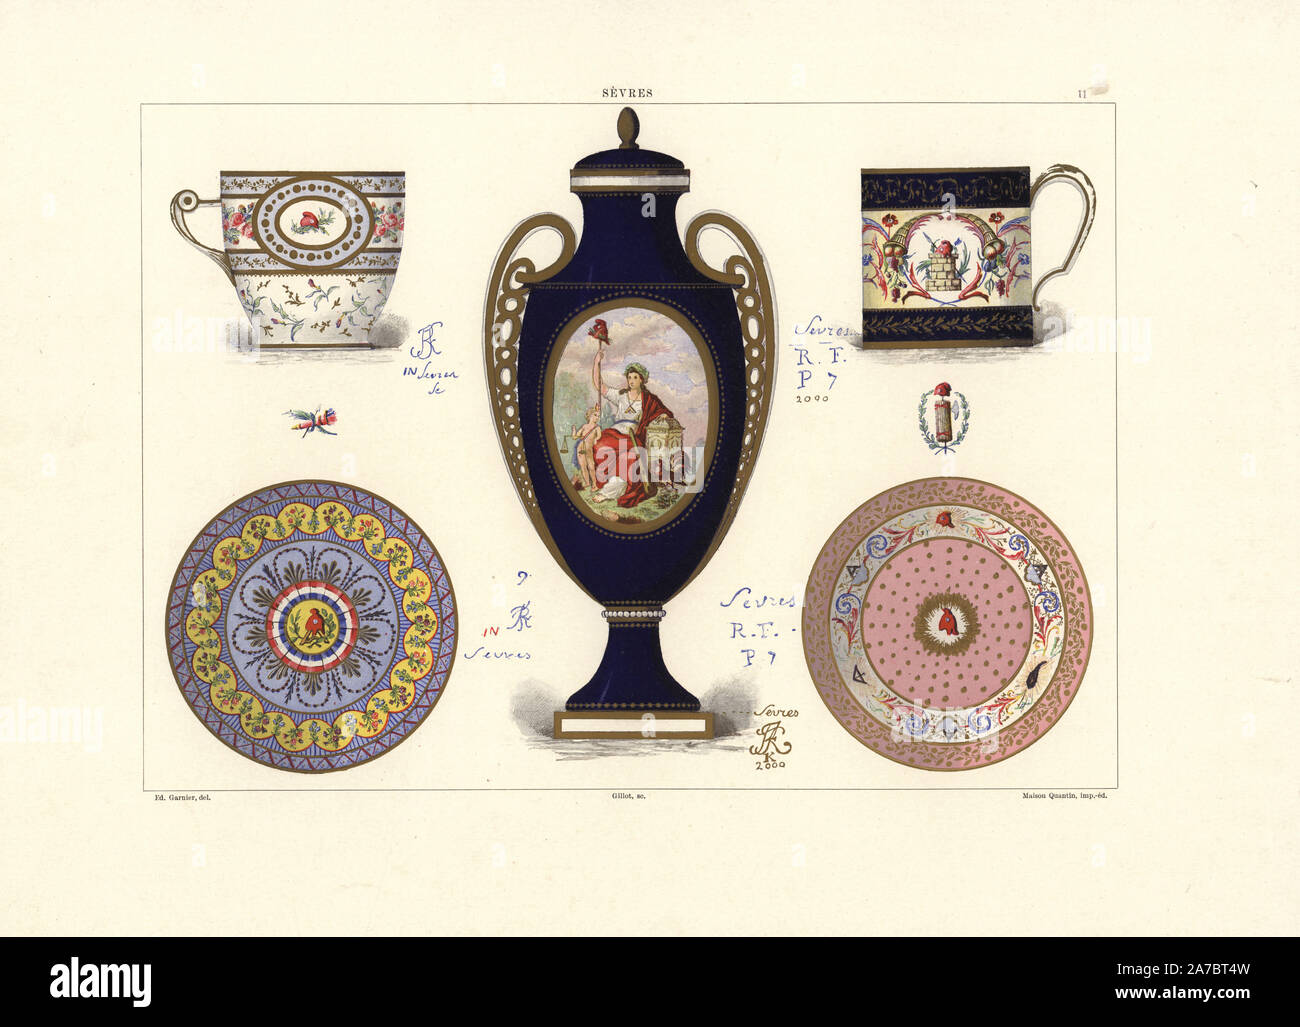 Porcelain from the French Revolutionary era: cup with flowers by Binet, cup decorated by Pithou Jr., vase painted by Charles-Nicolas Dodin, plate with flowers by Merault Jr., and plate decorated by Pithou Jr. Chromolithograph by Gillot of an illustration by Edouard Garnier from The Soft Paste Porcelain of Sevres, Maison Quantin, Paris, 1891. Stock Photo